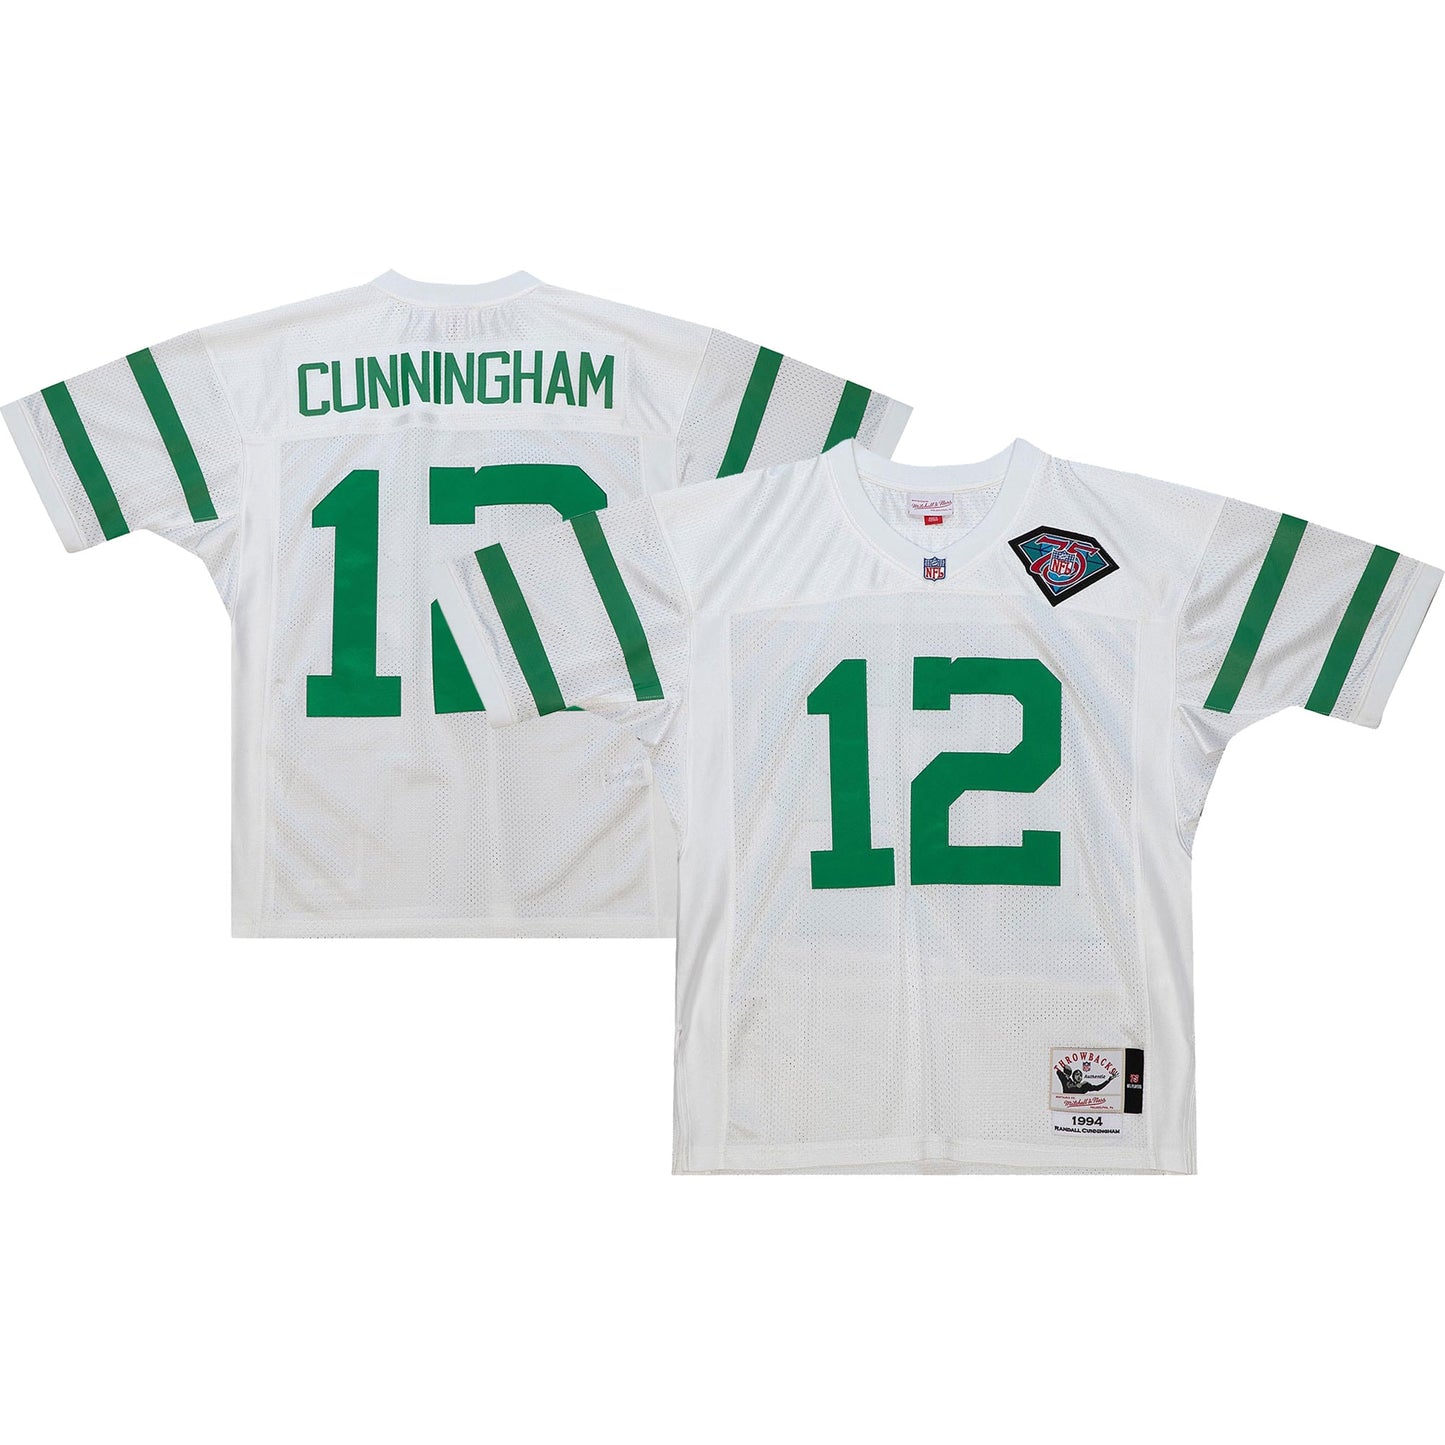 Randall Cunningham Philadelphia Eagles Mitchell & Ness 1994 Authentic Retired Player Jersey - White